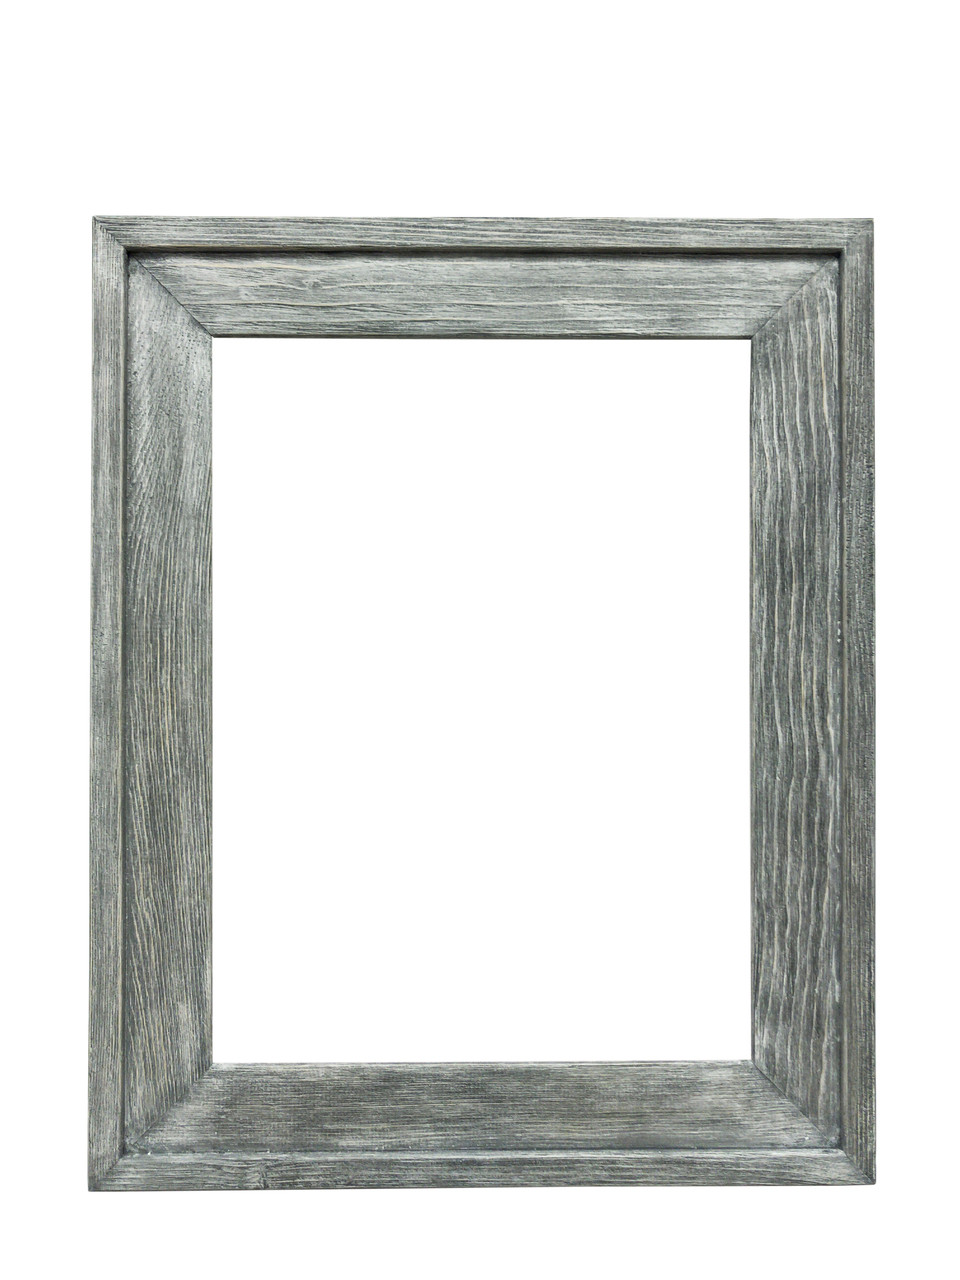 8x8 Frame Grey Real Wood Picture Frame Width 1.5 Inches | Interior Frame  Depth 0.5 Inches | Barn Grey Distressed Photo Frame Complete with UV  Acrylic